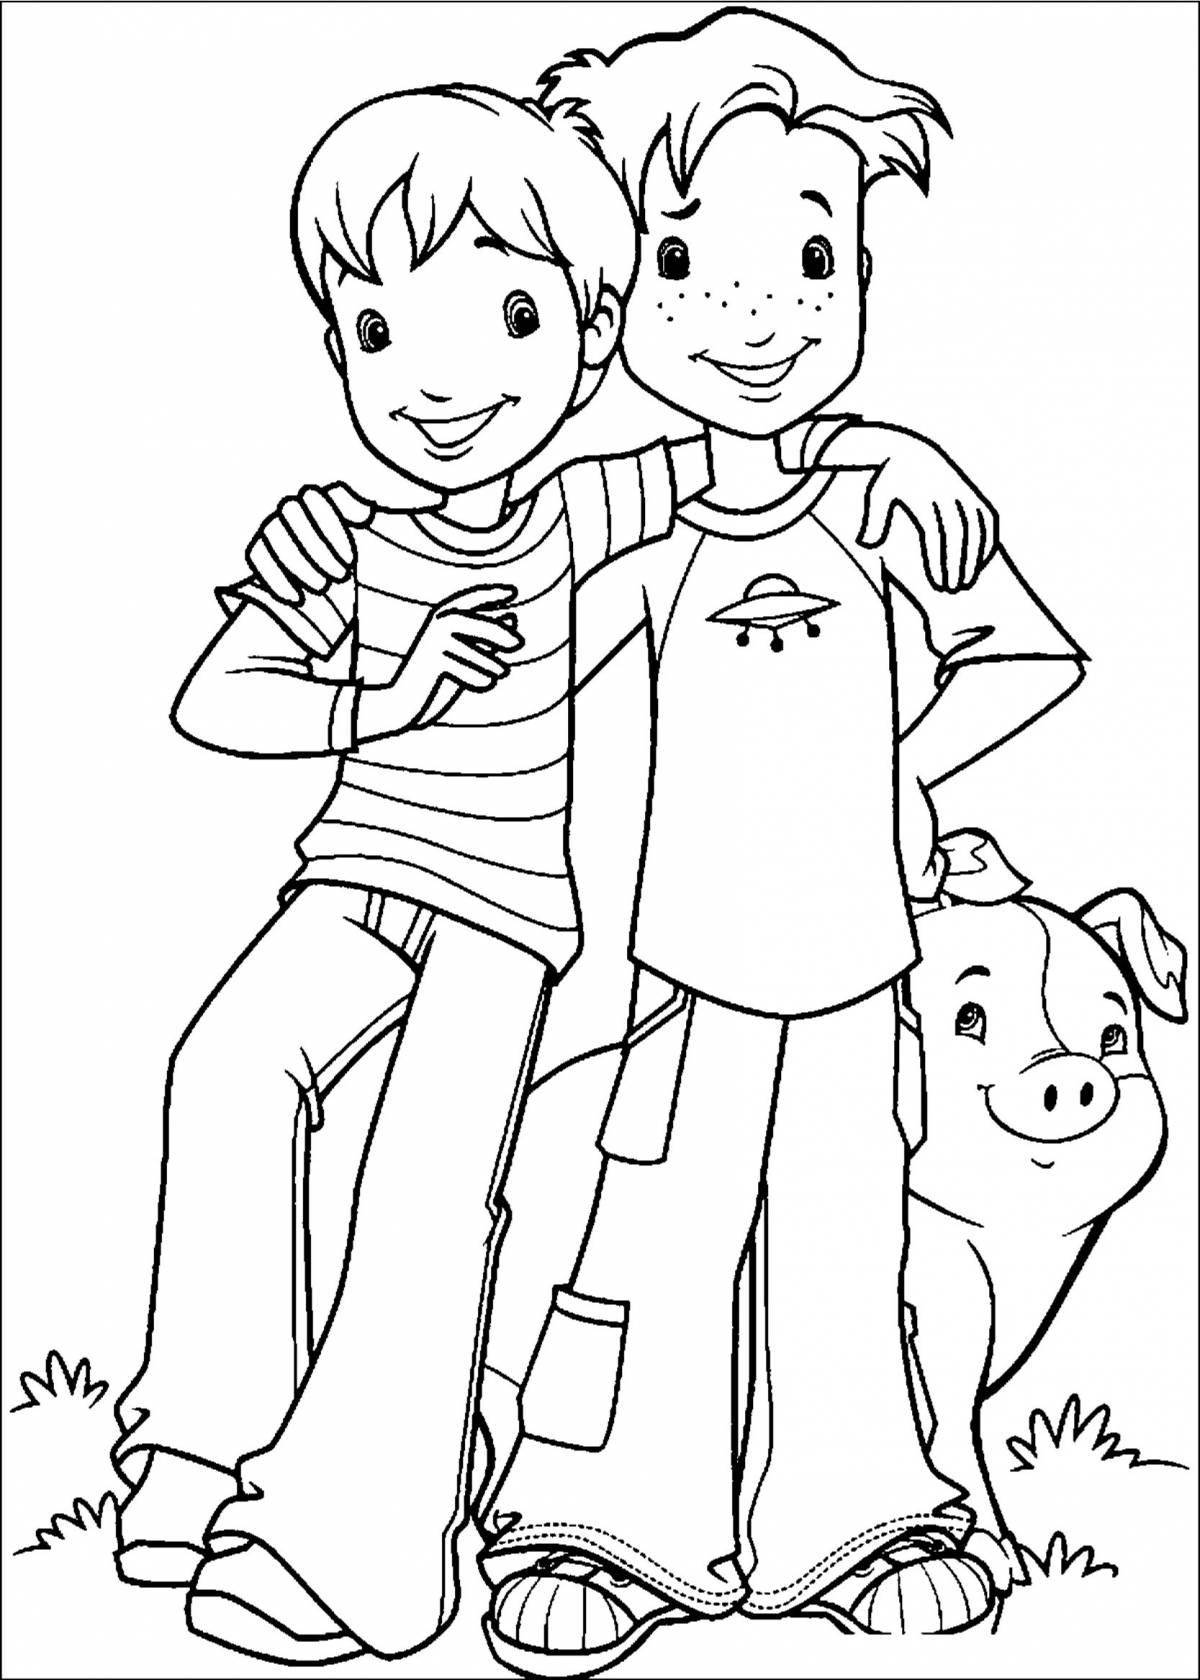 Coloring page wild friendship